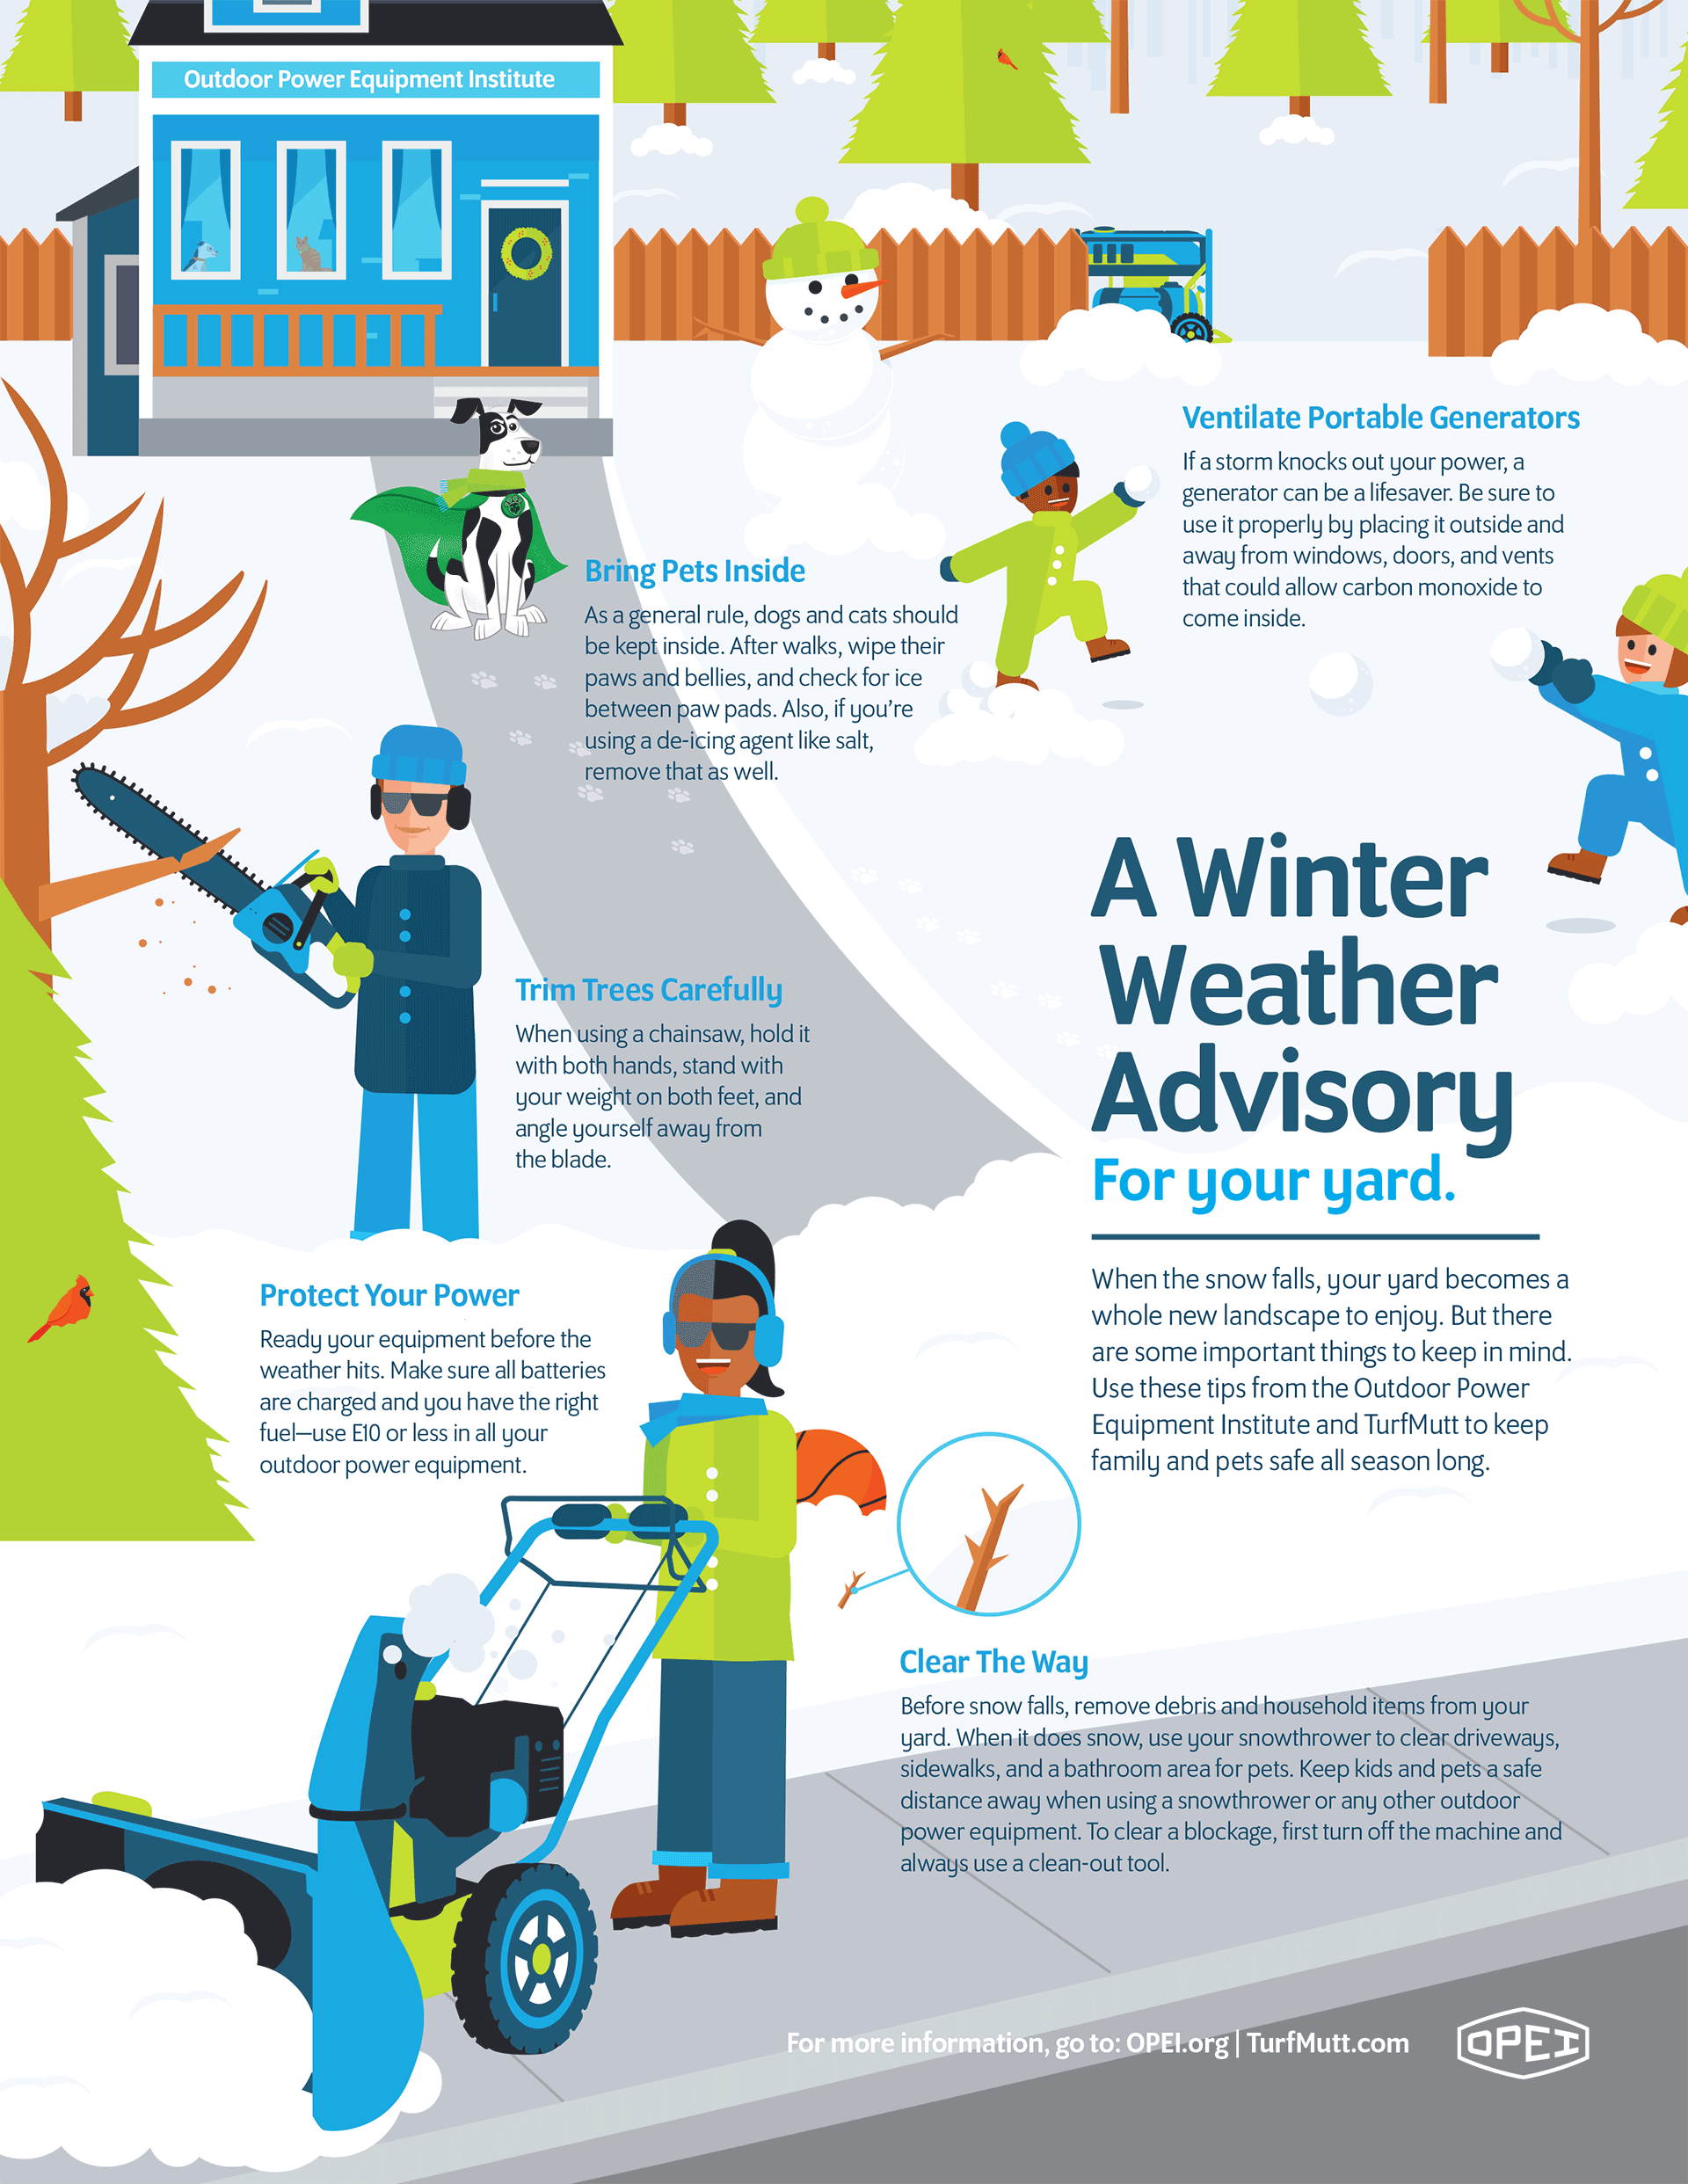 A winter weather advisory for your yard